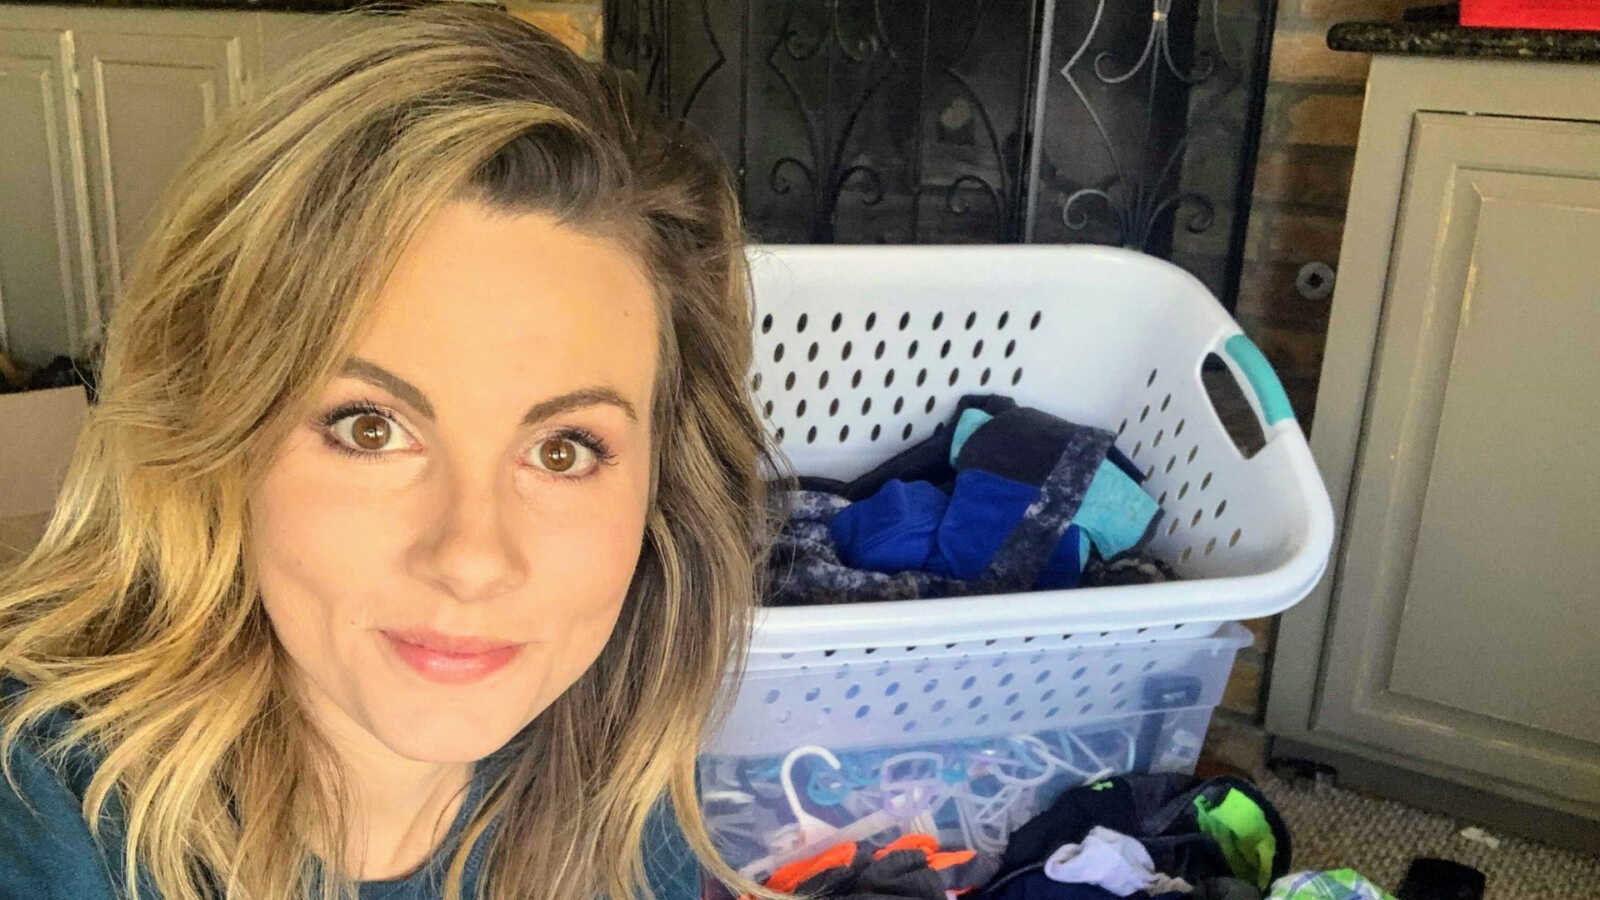 Mother smiling amongst pile of clothes and laundry basket